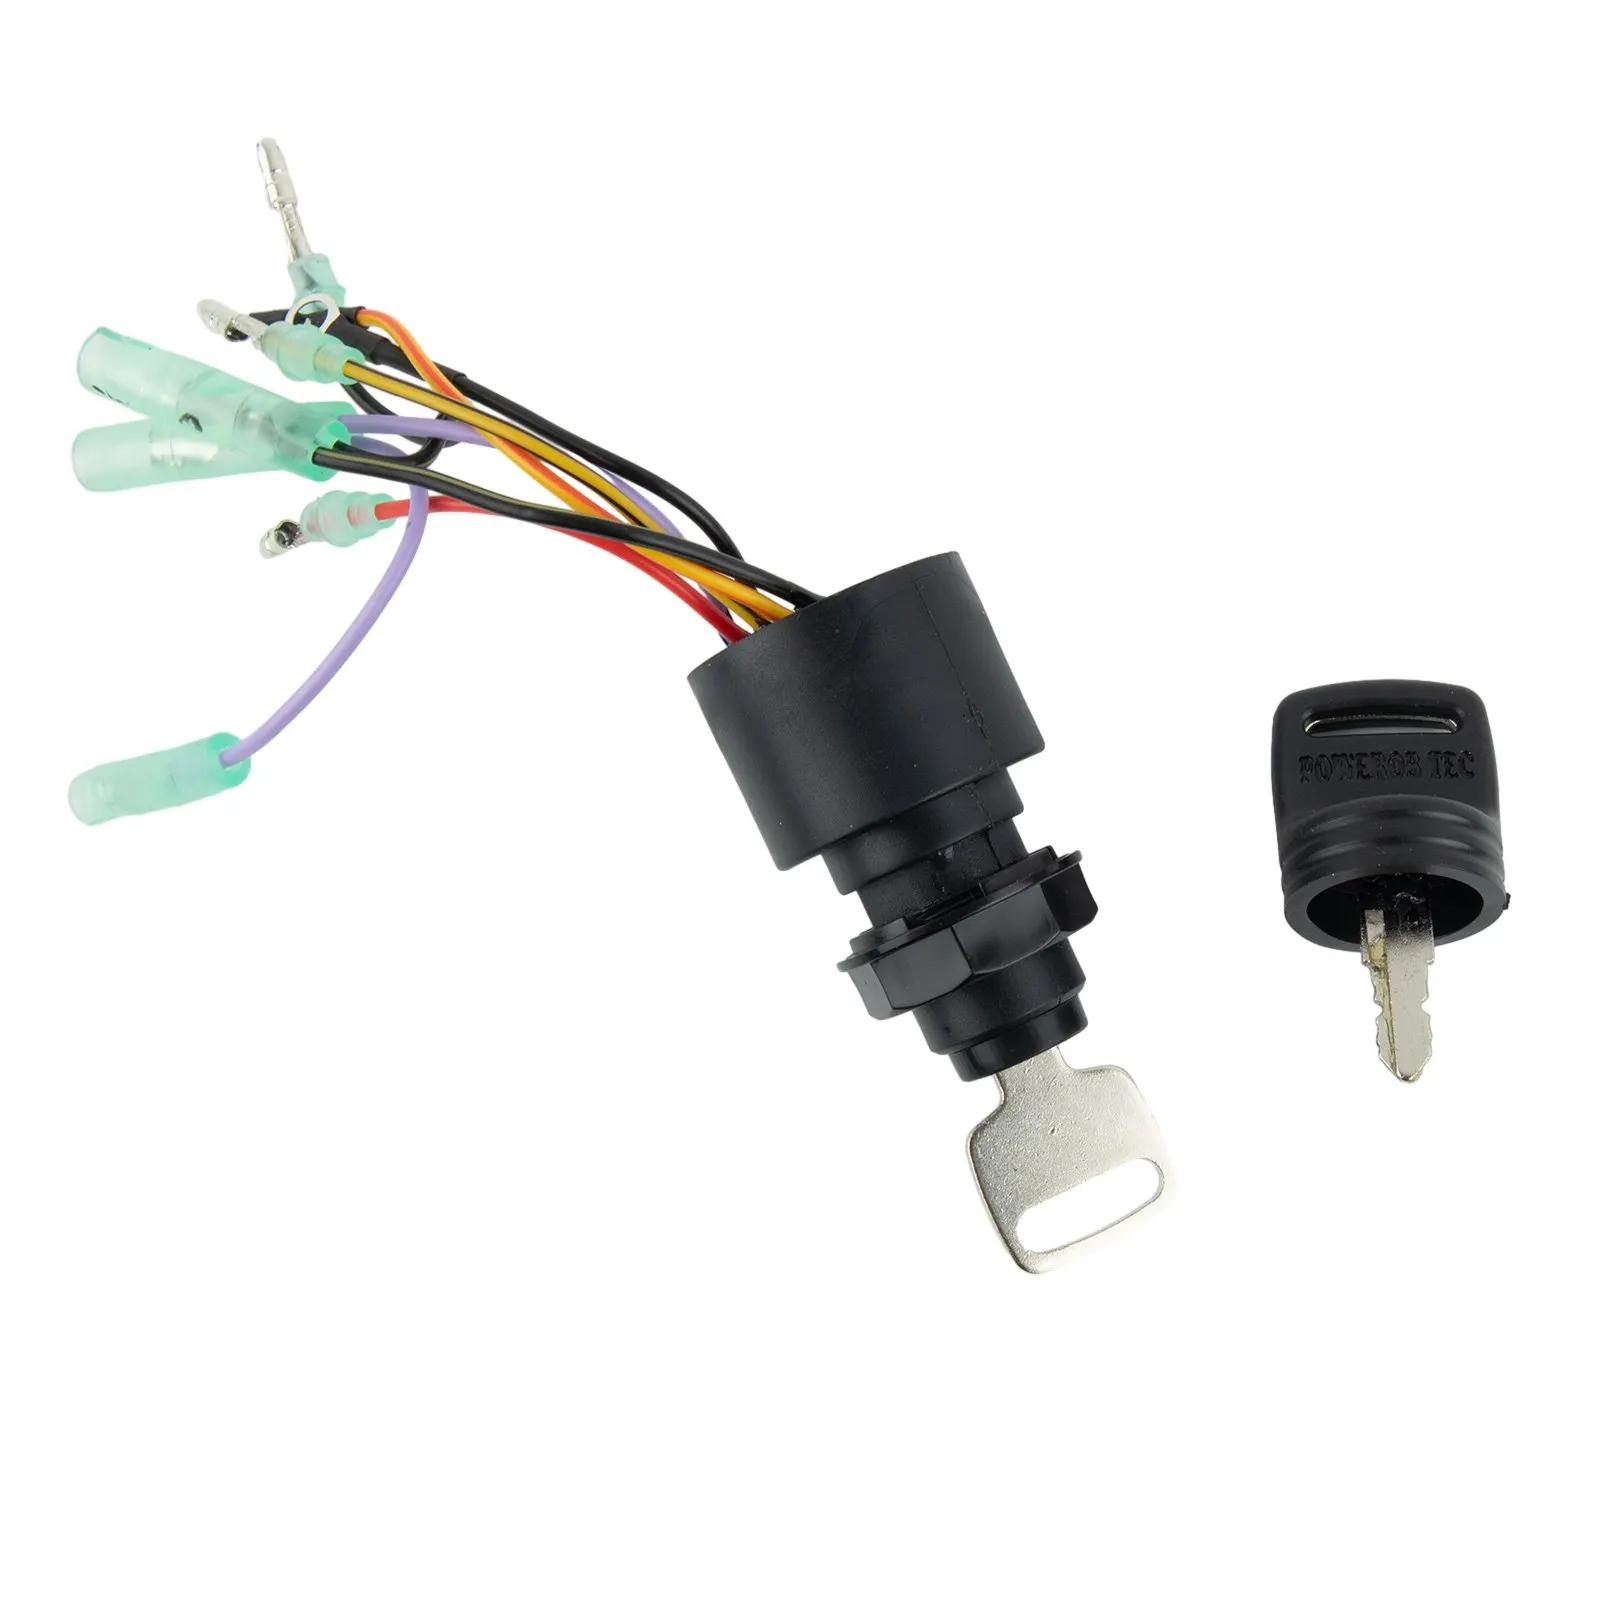 

Parts Ignition Key Switch Fittings For Mercury Motors Outboard Plastic + Metal Replacement With 2x Key 3 Position